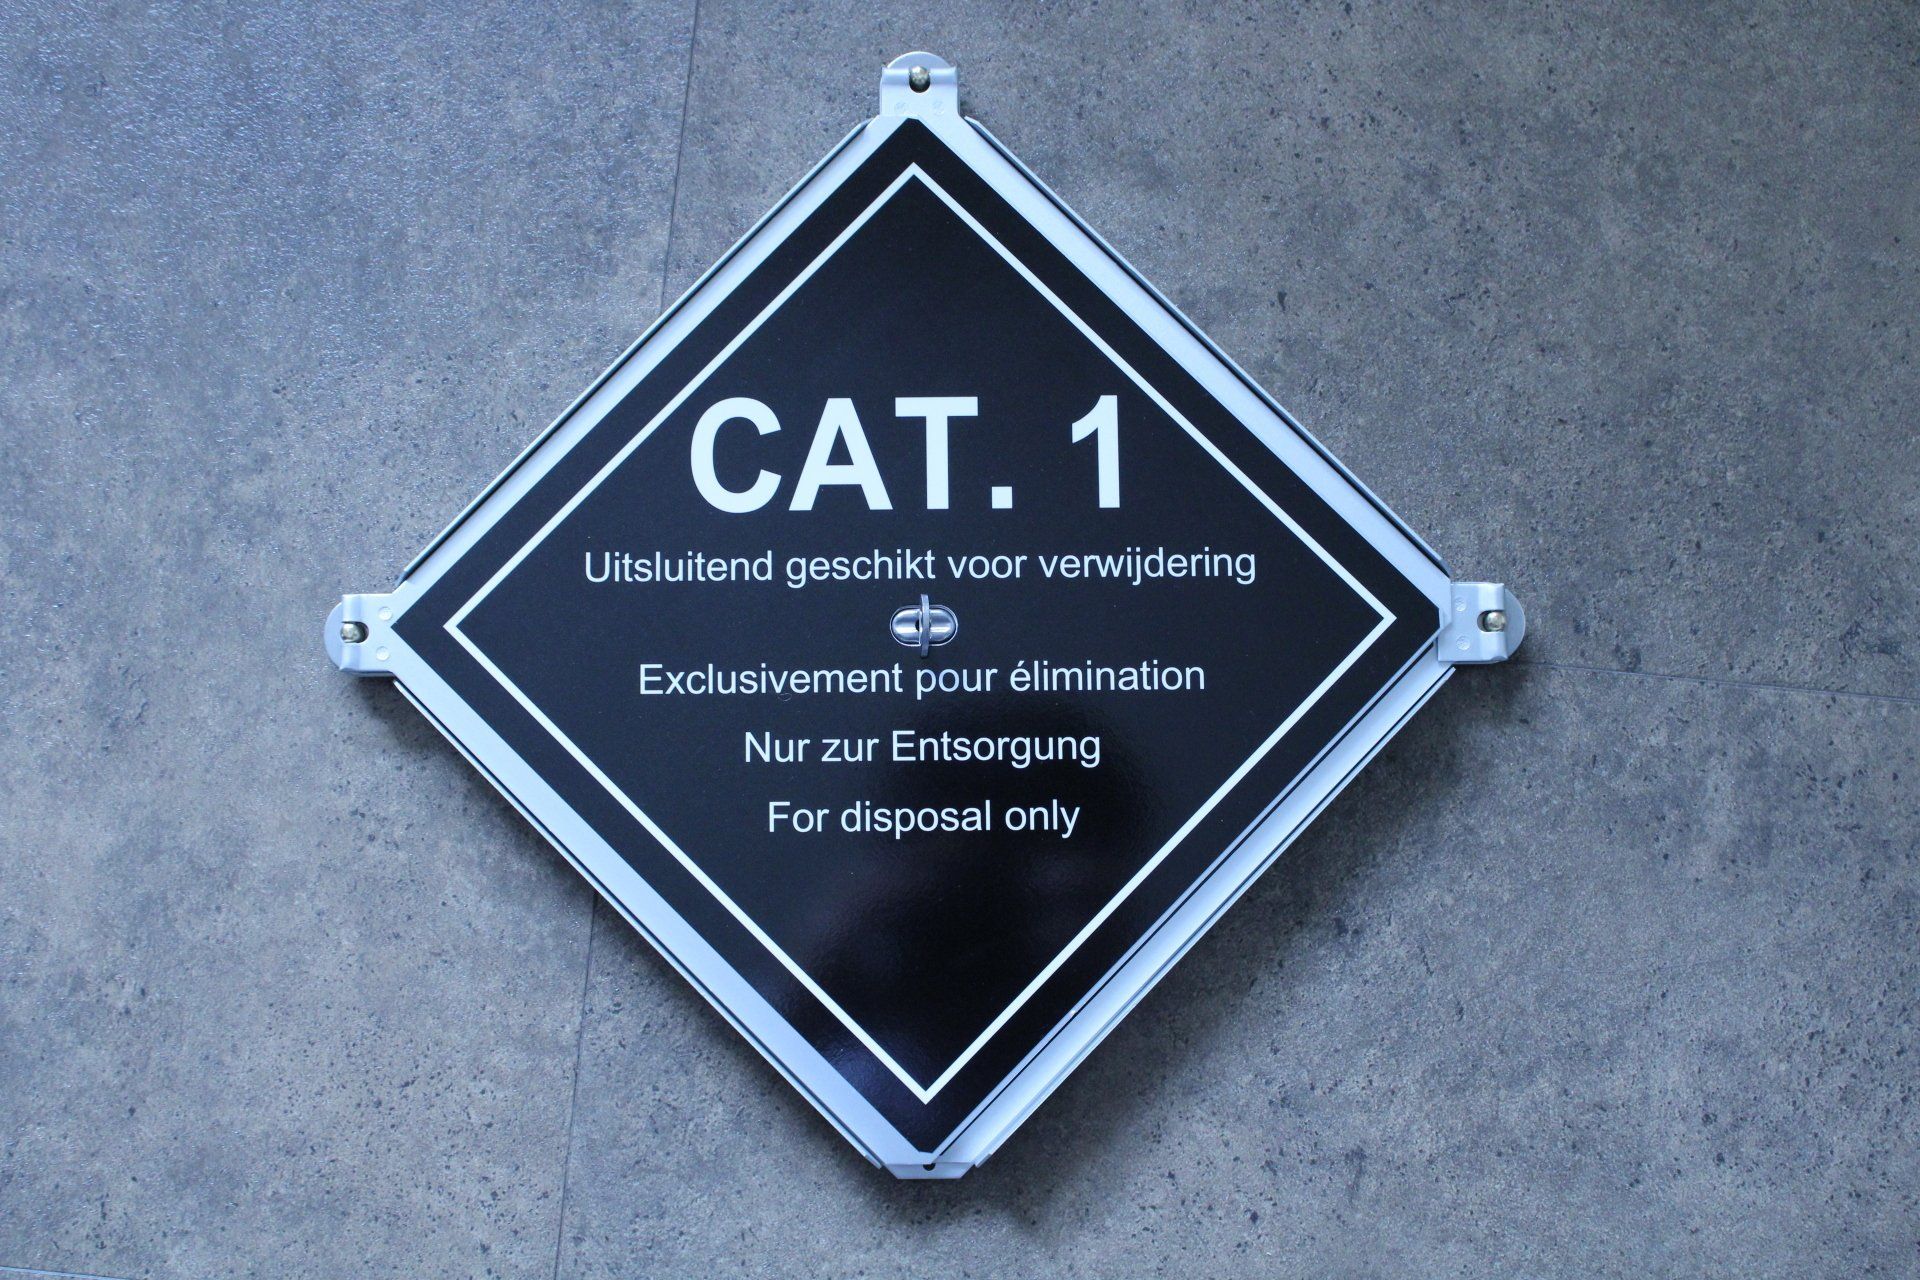 Gefahrzettelbox with Categorie 1 (animal by-products, Cat 1)